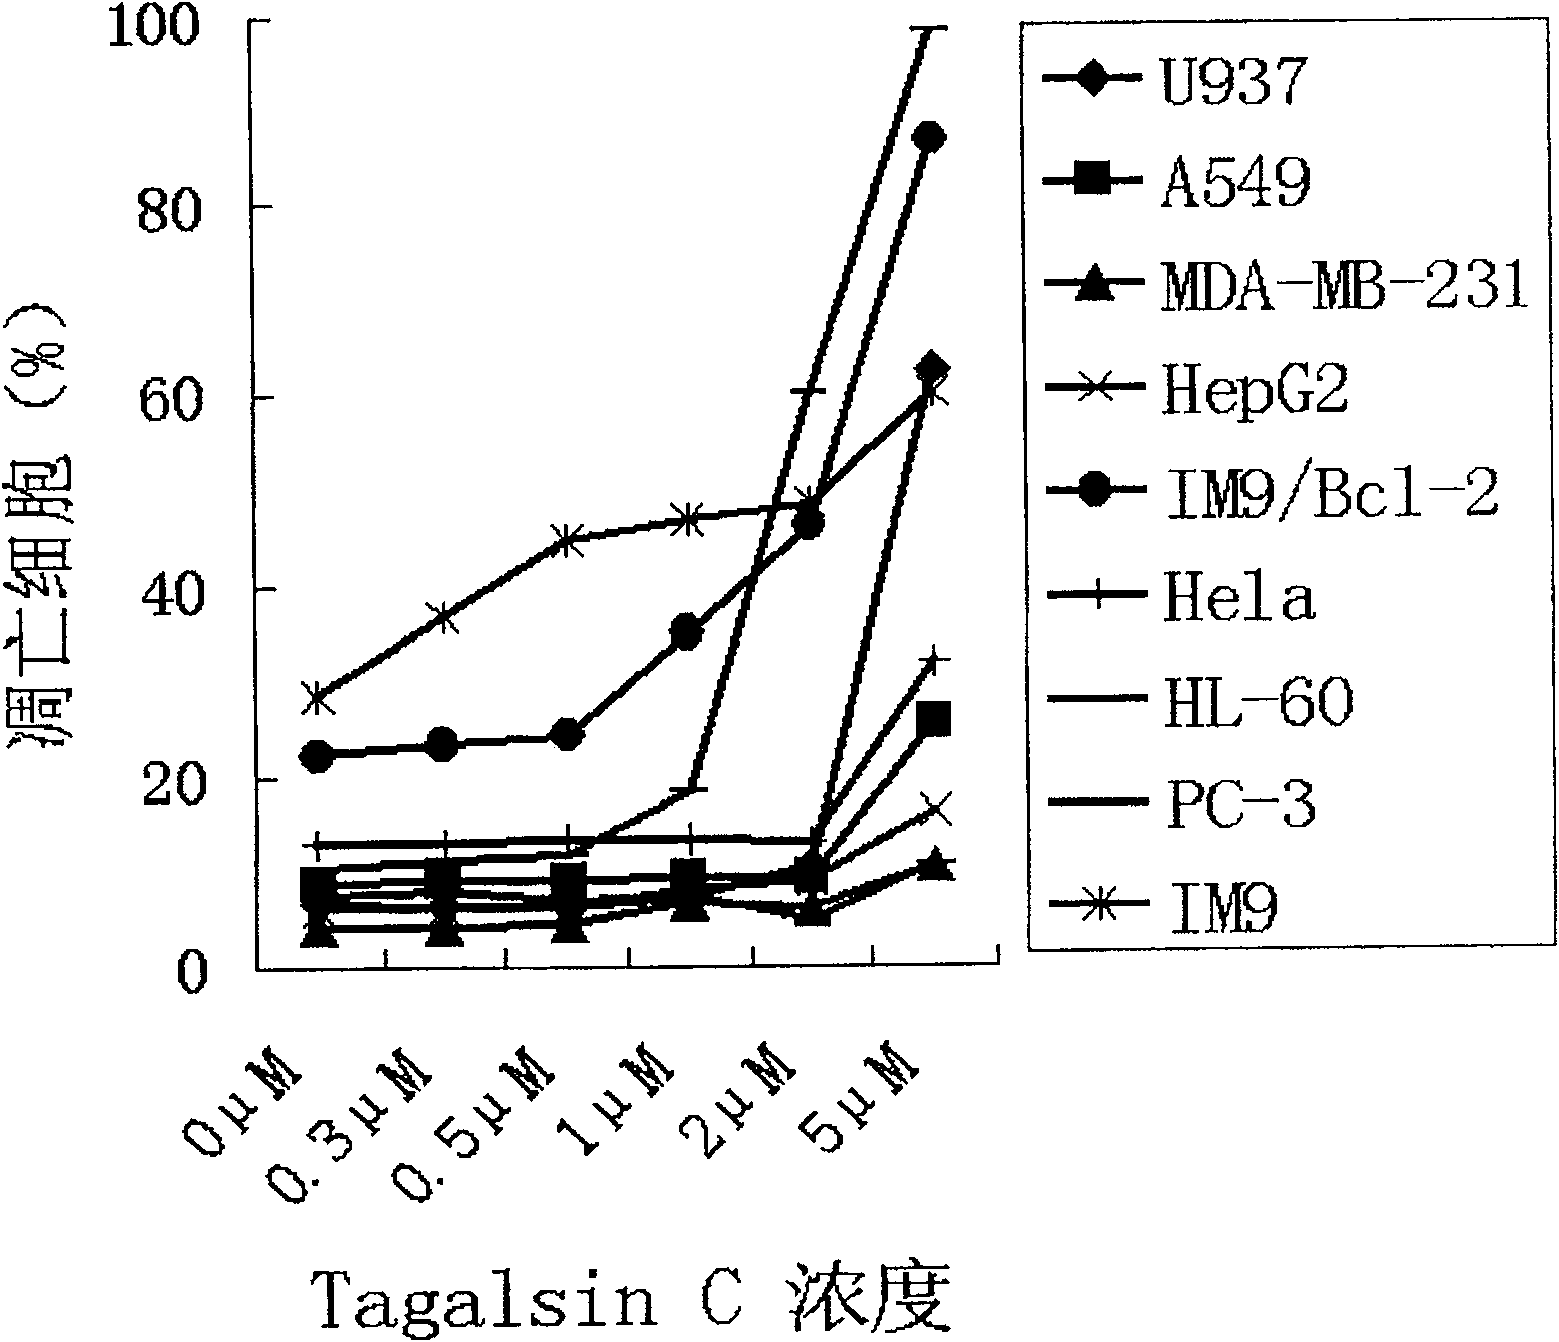 Application of Tagalsin C and its homologous compound in preparing anti-tumor medicine